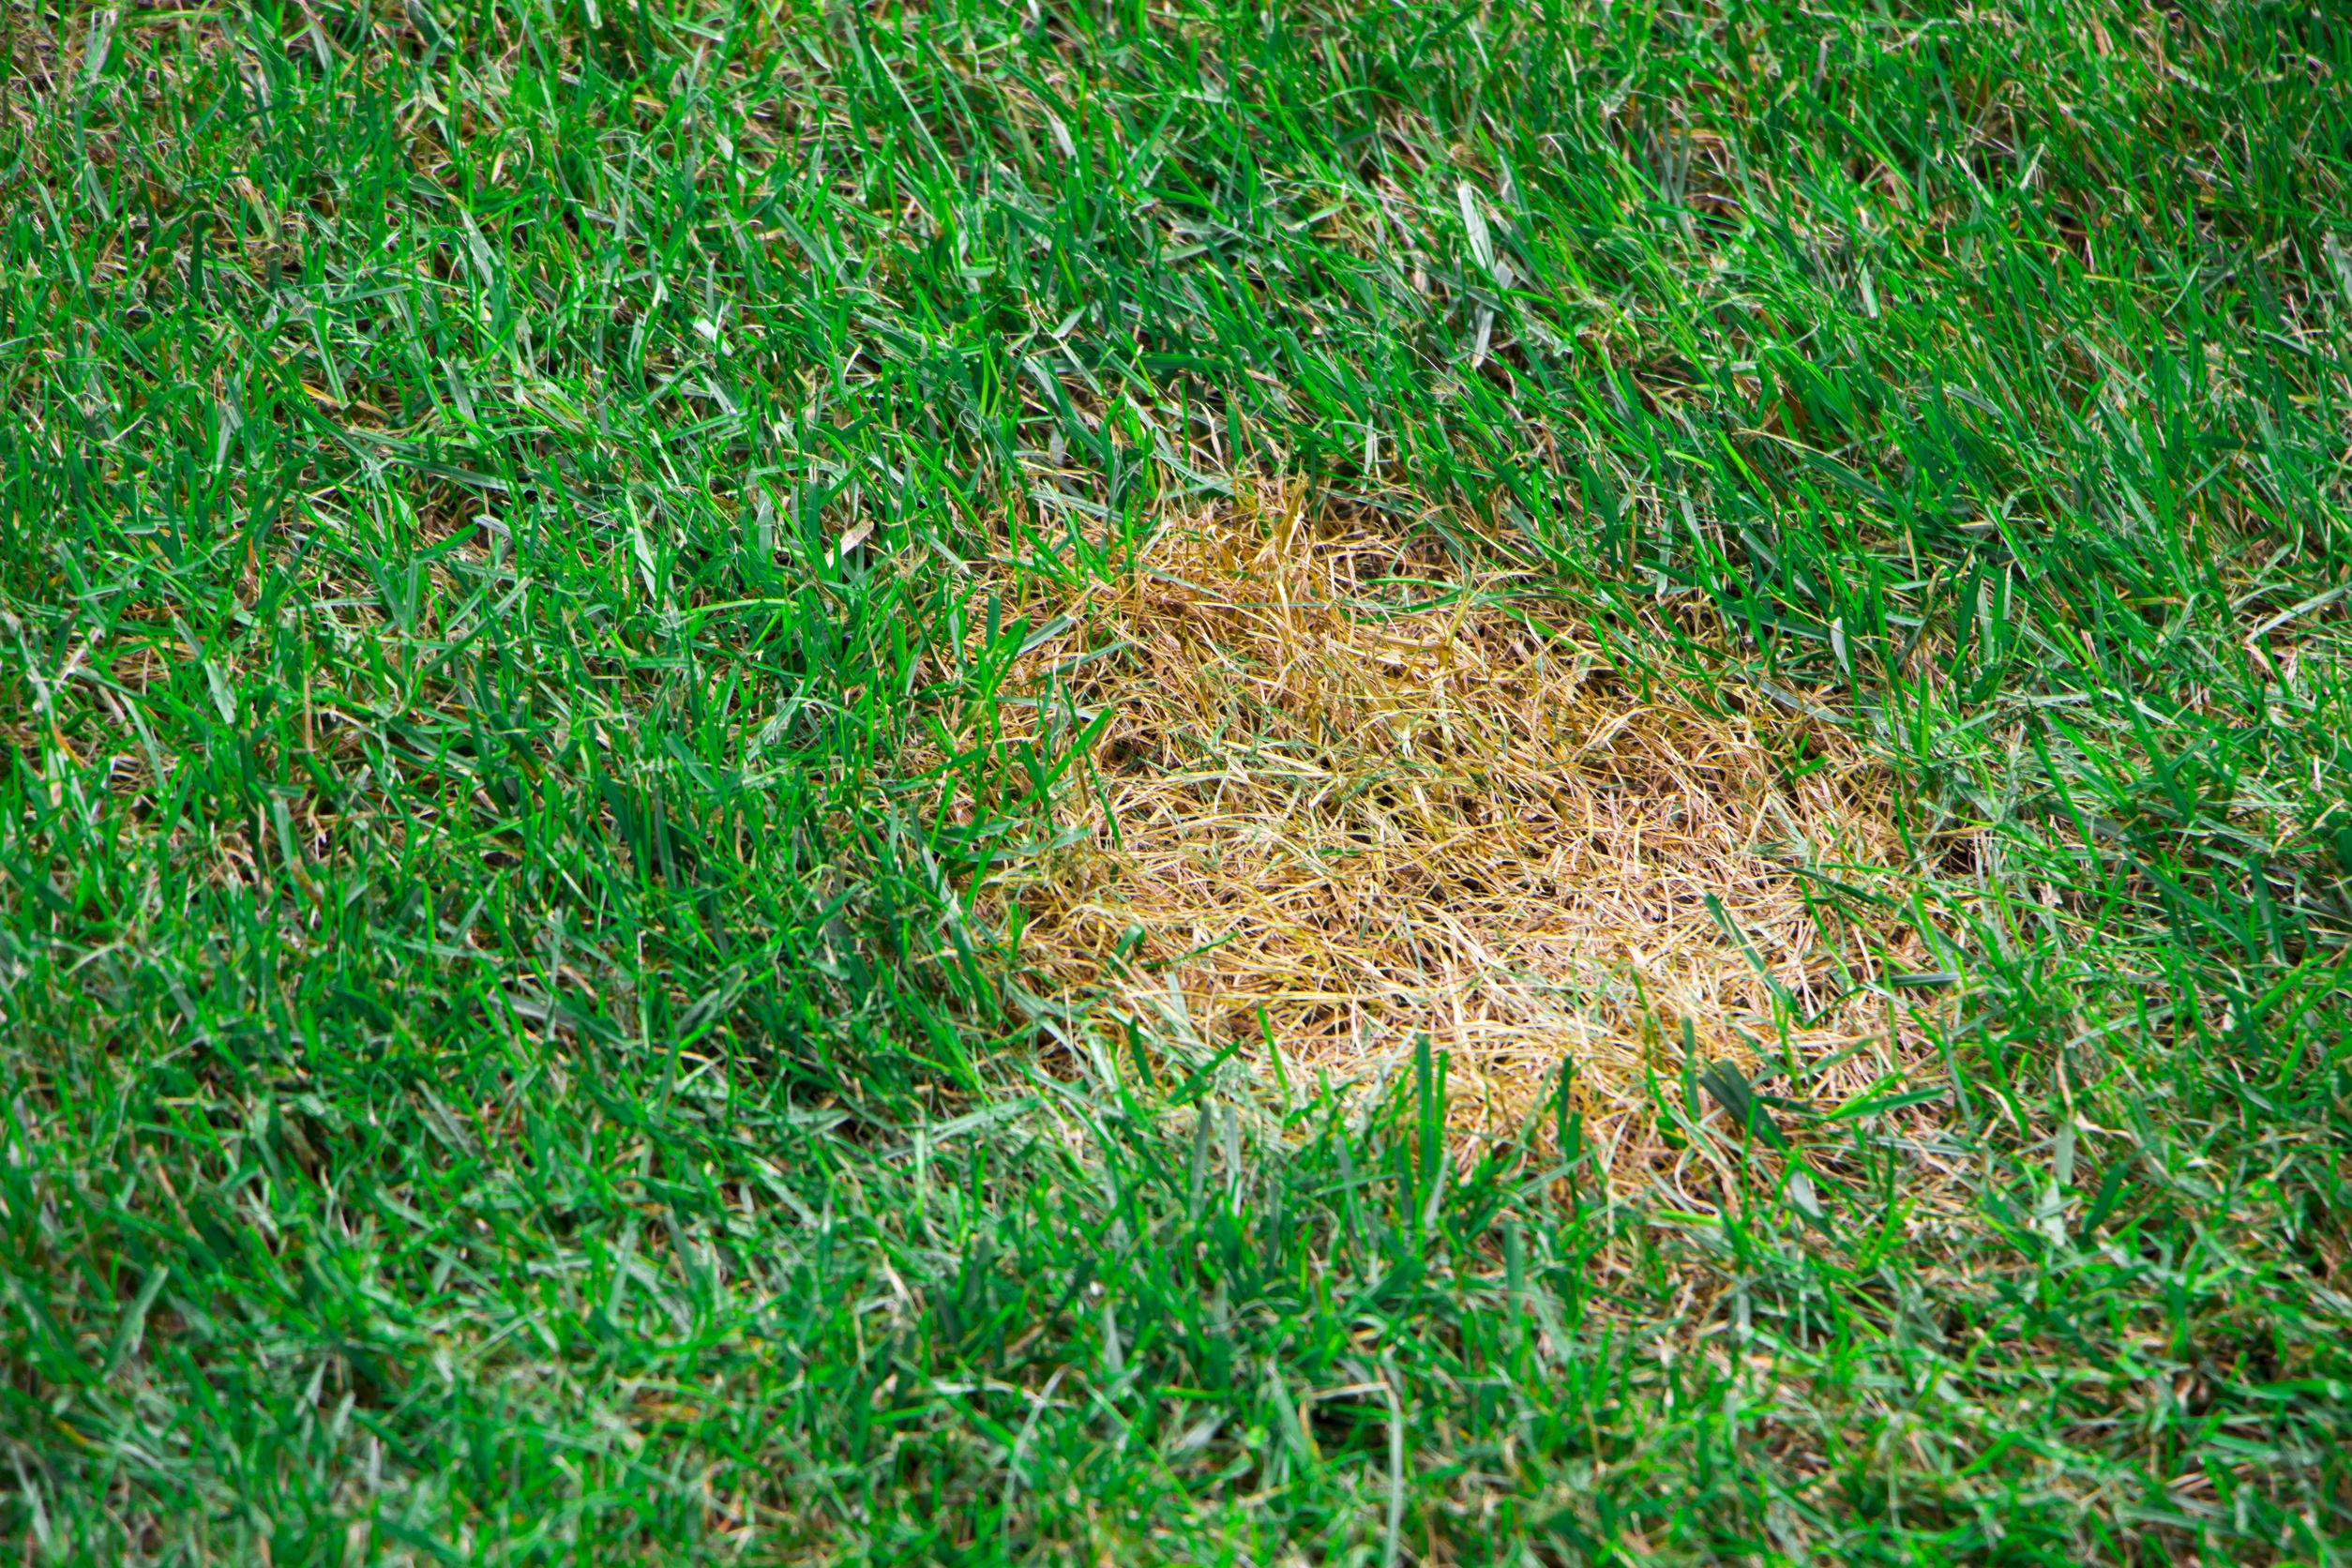 Common Fall Lawn Diseases - Cardinal Lawns